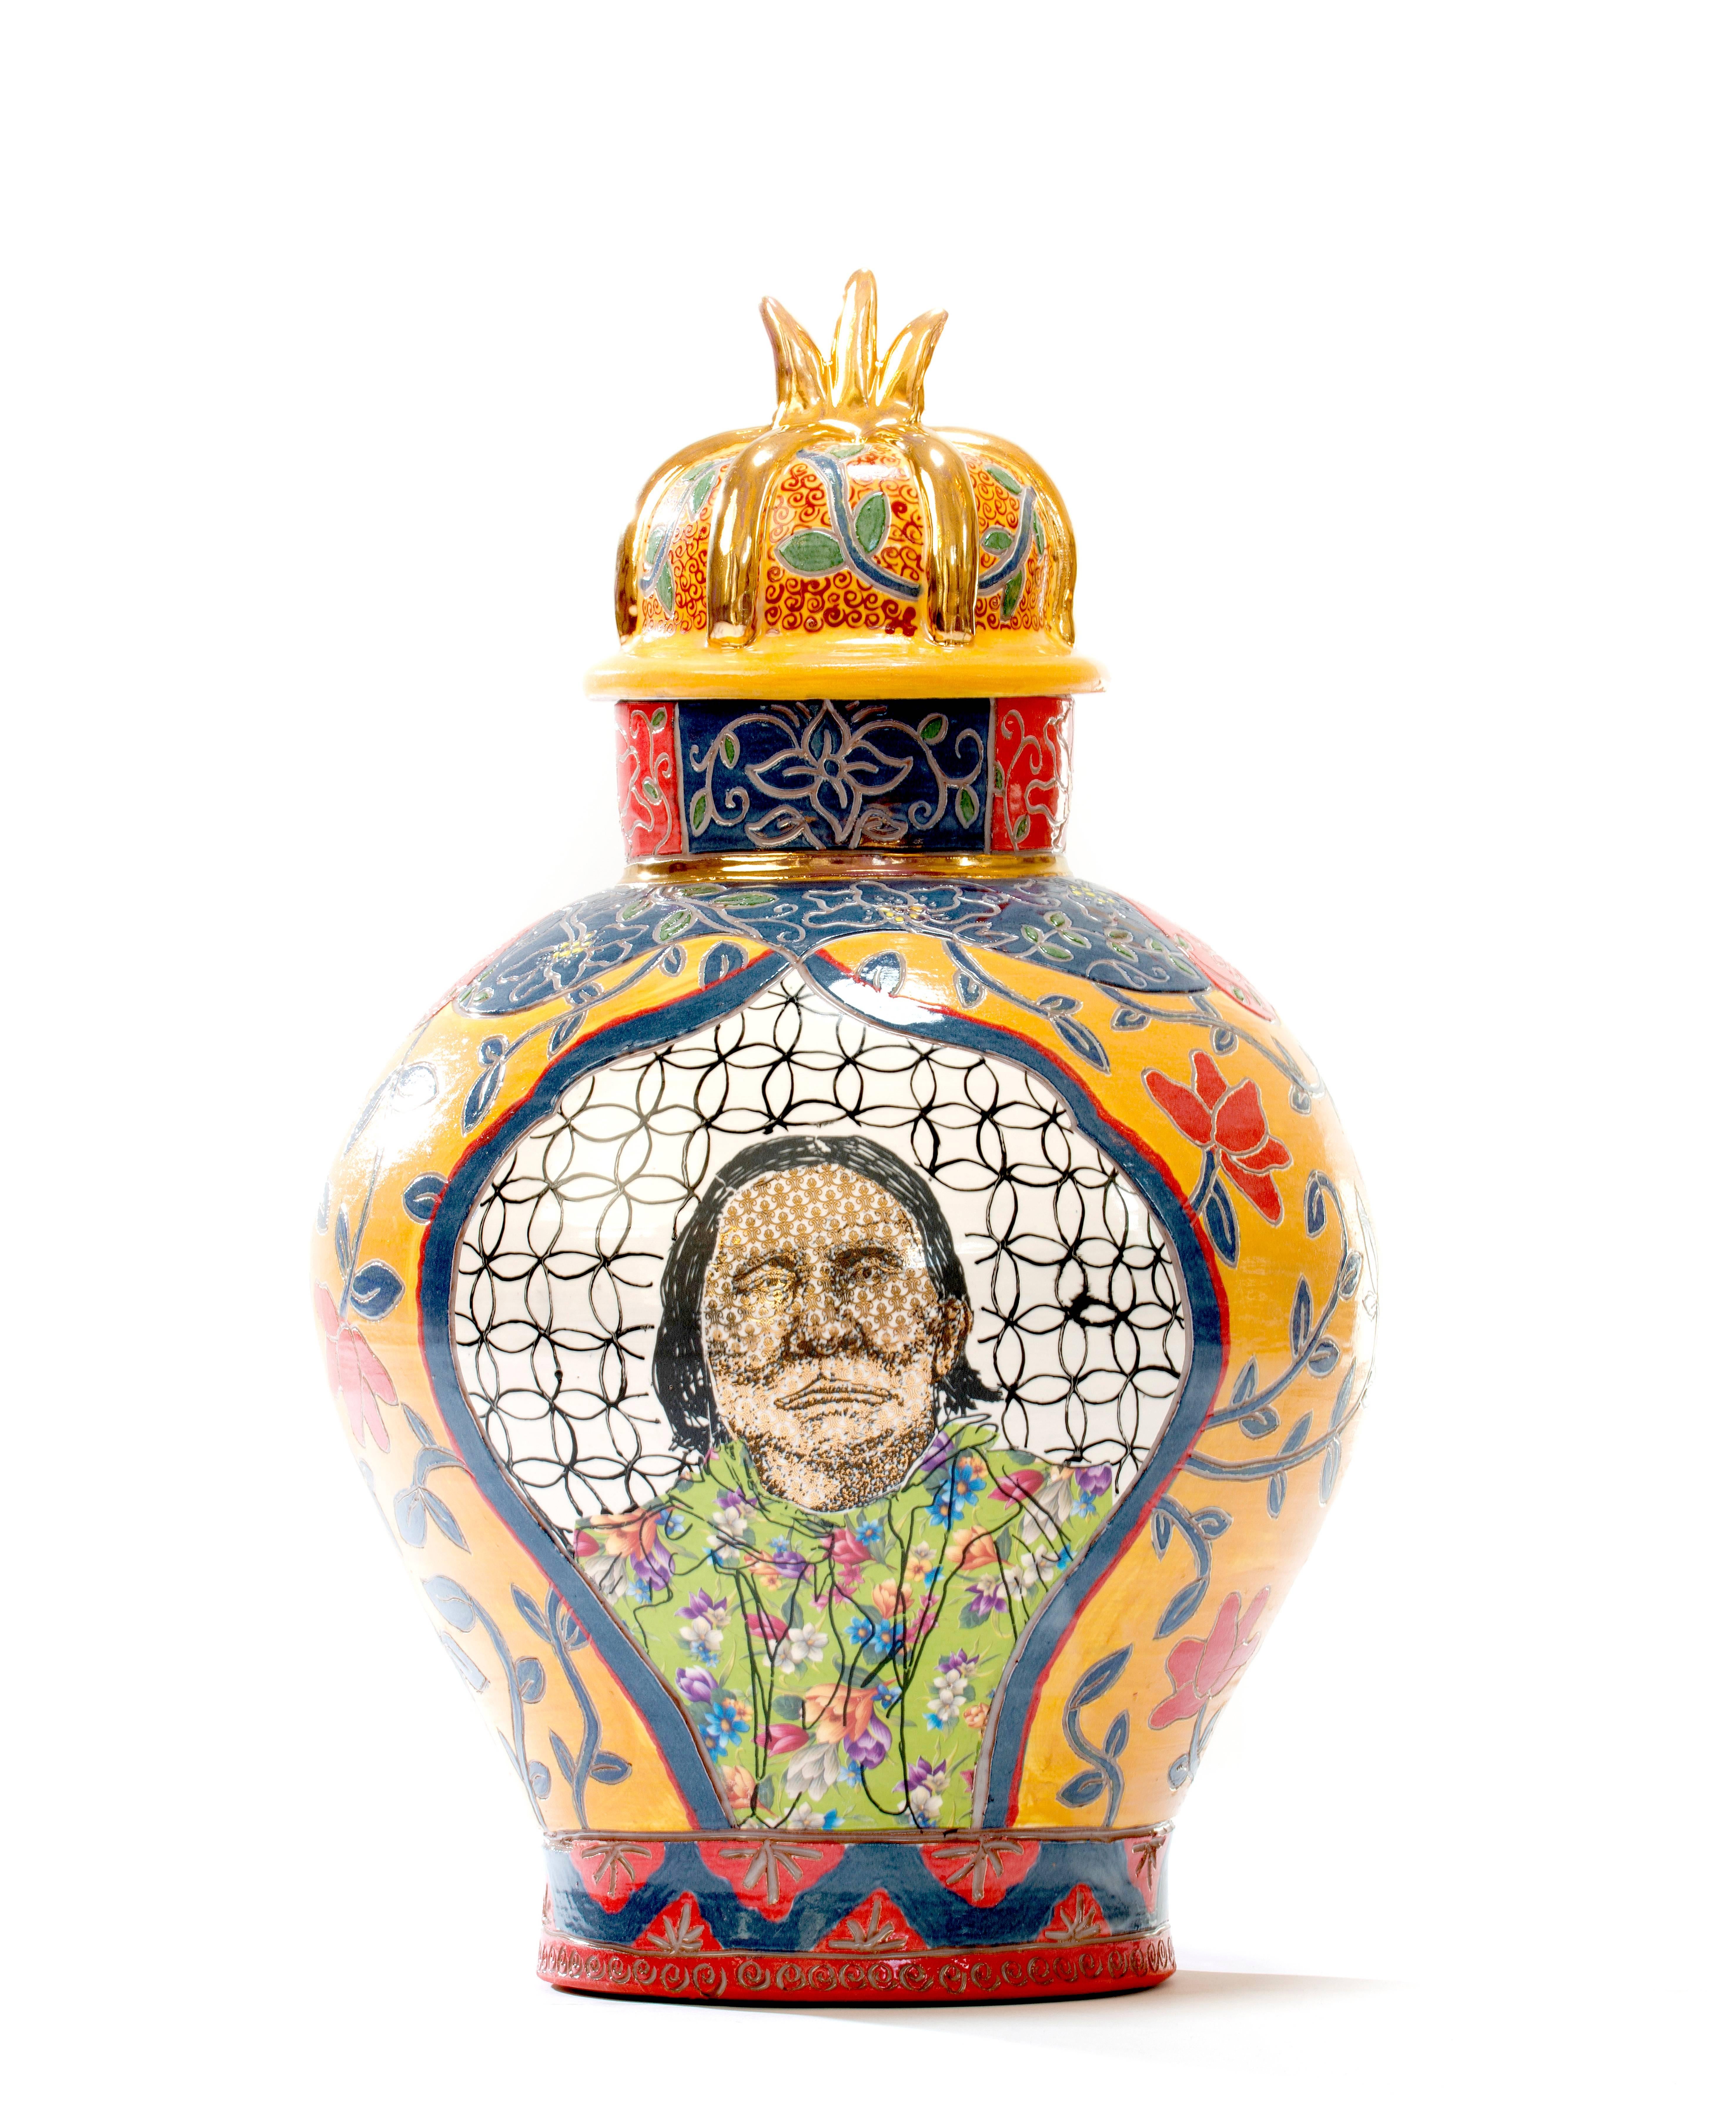 Ruth Bader Ginsberg / Geronimo Urn is made by Roberto Lugo out of porcelain, china paint and gold luster.

Best known for expertly thrown ceramic vessels that are illustrated with activists, political figures, and hip-hop legends, Lugo aims to reach